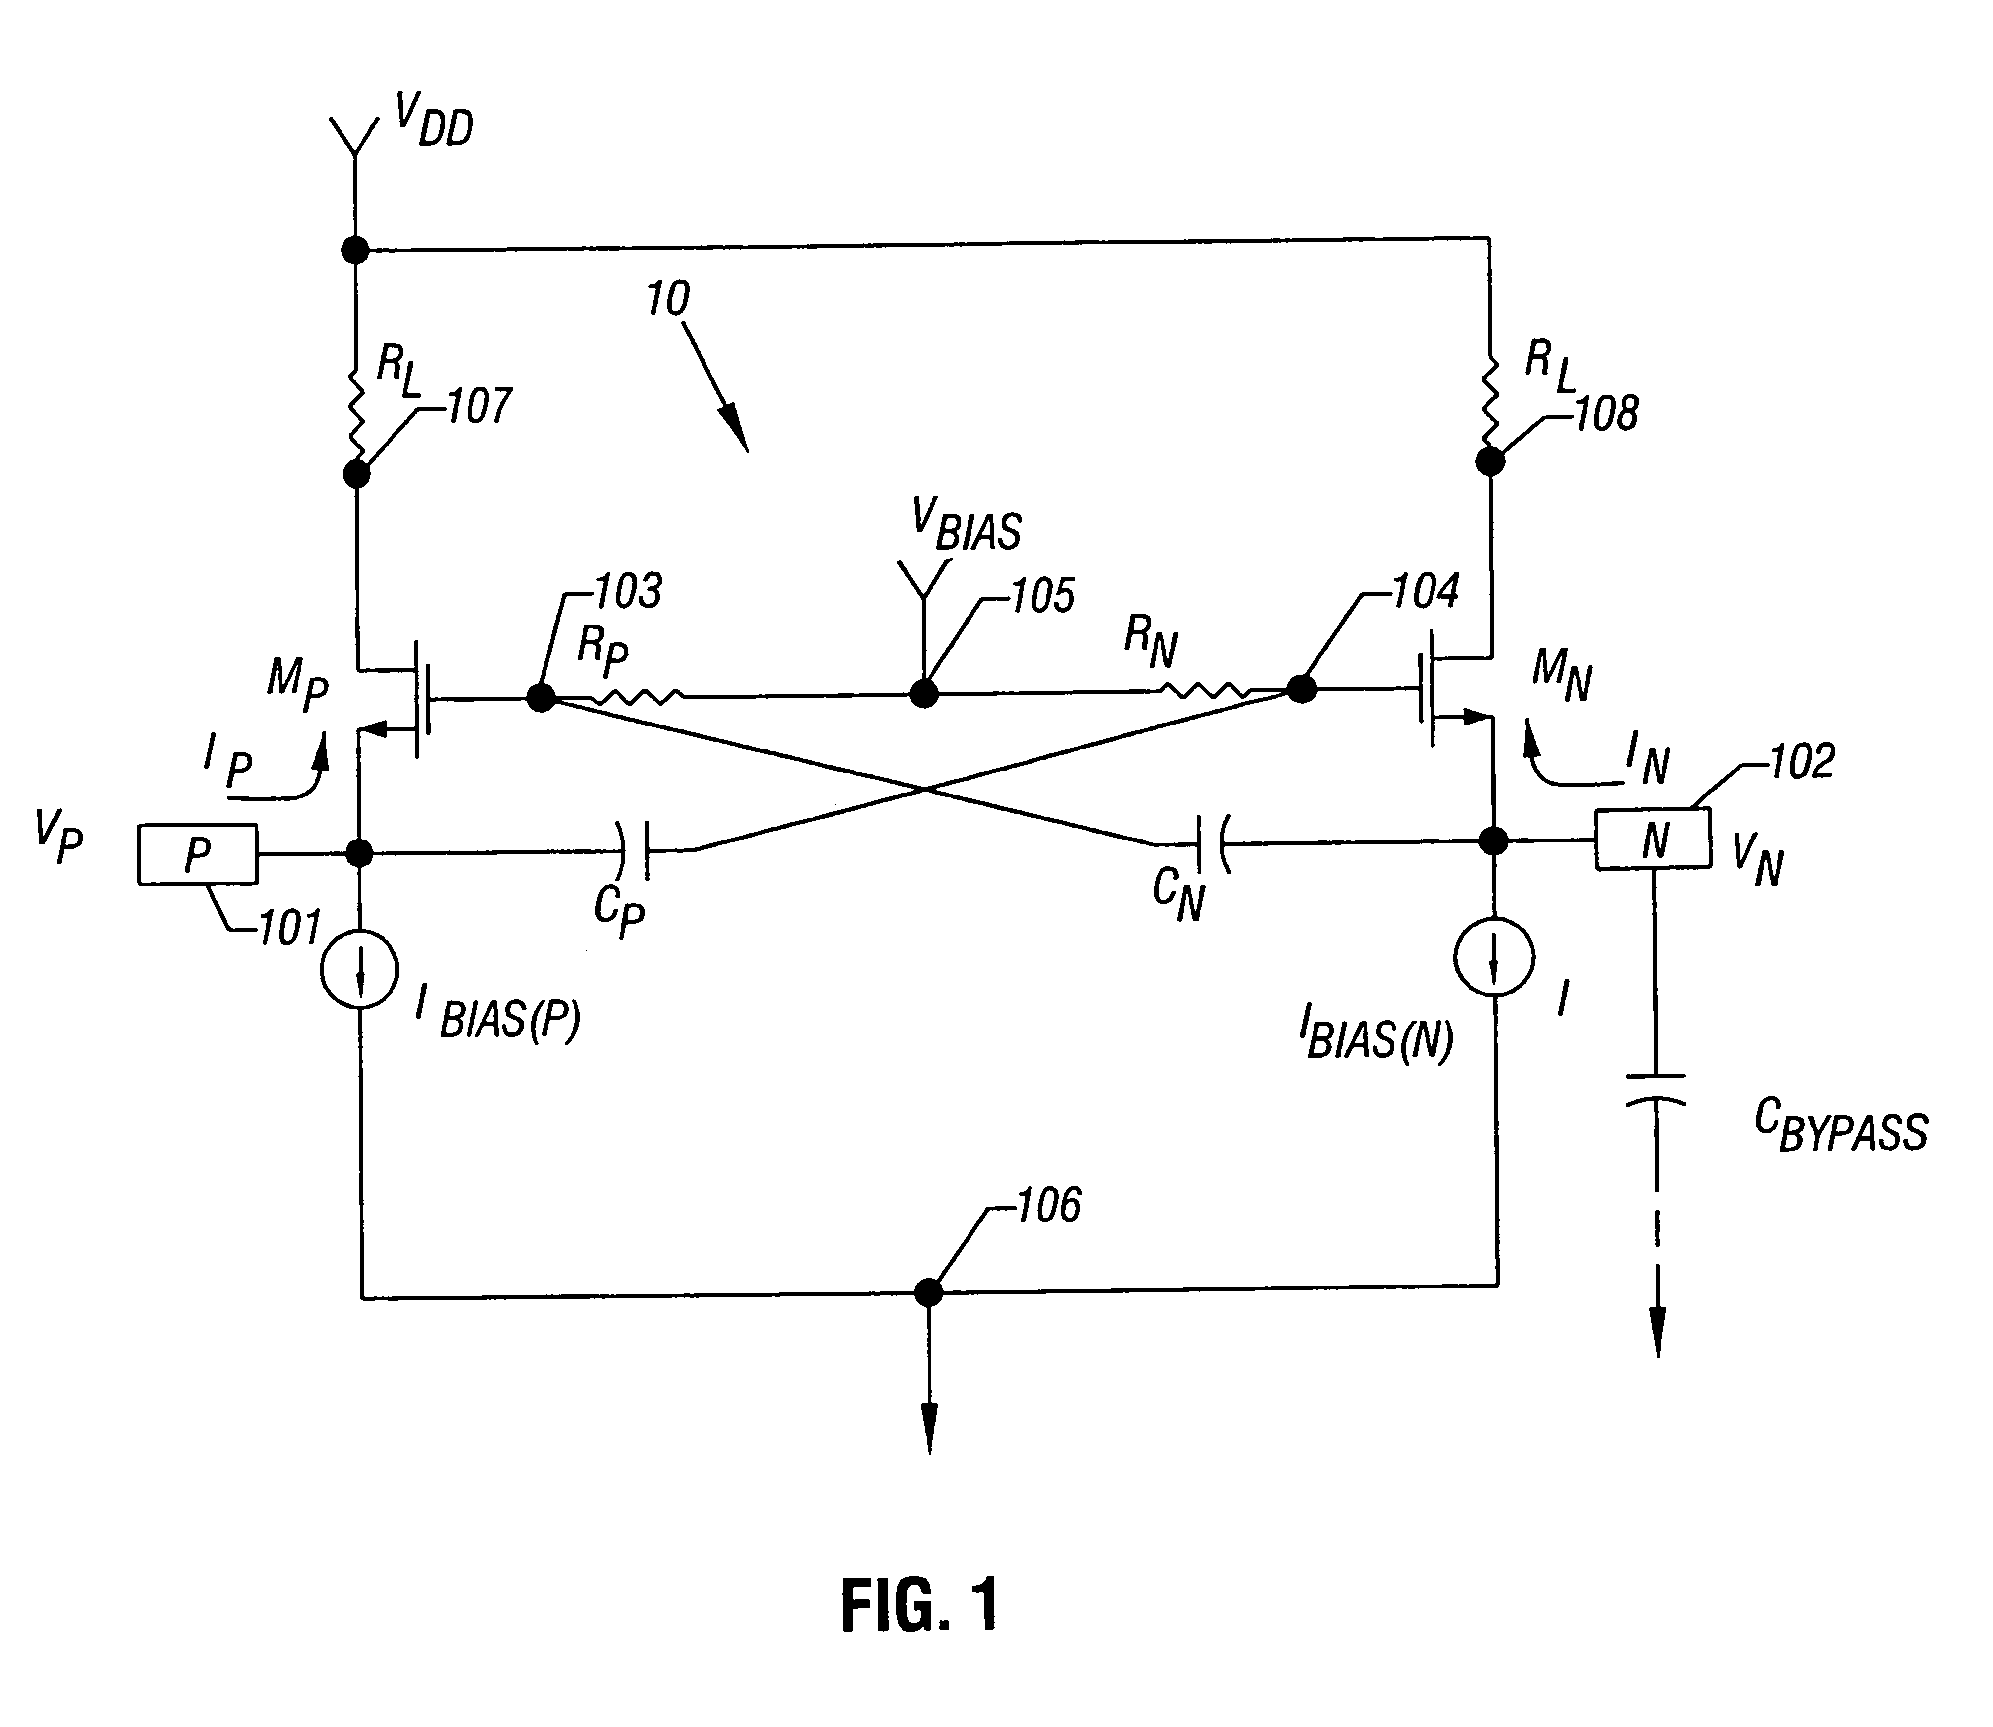 Differential/single-ended input stage